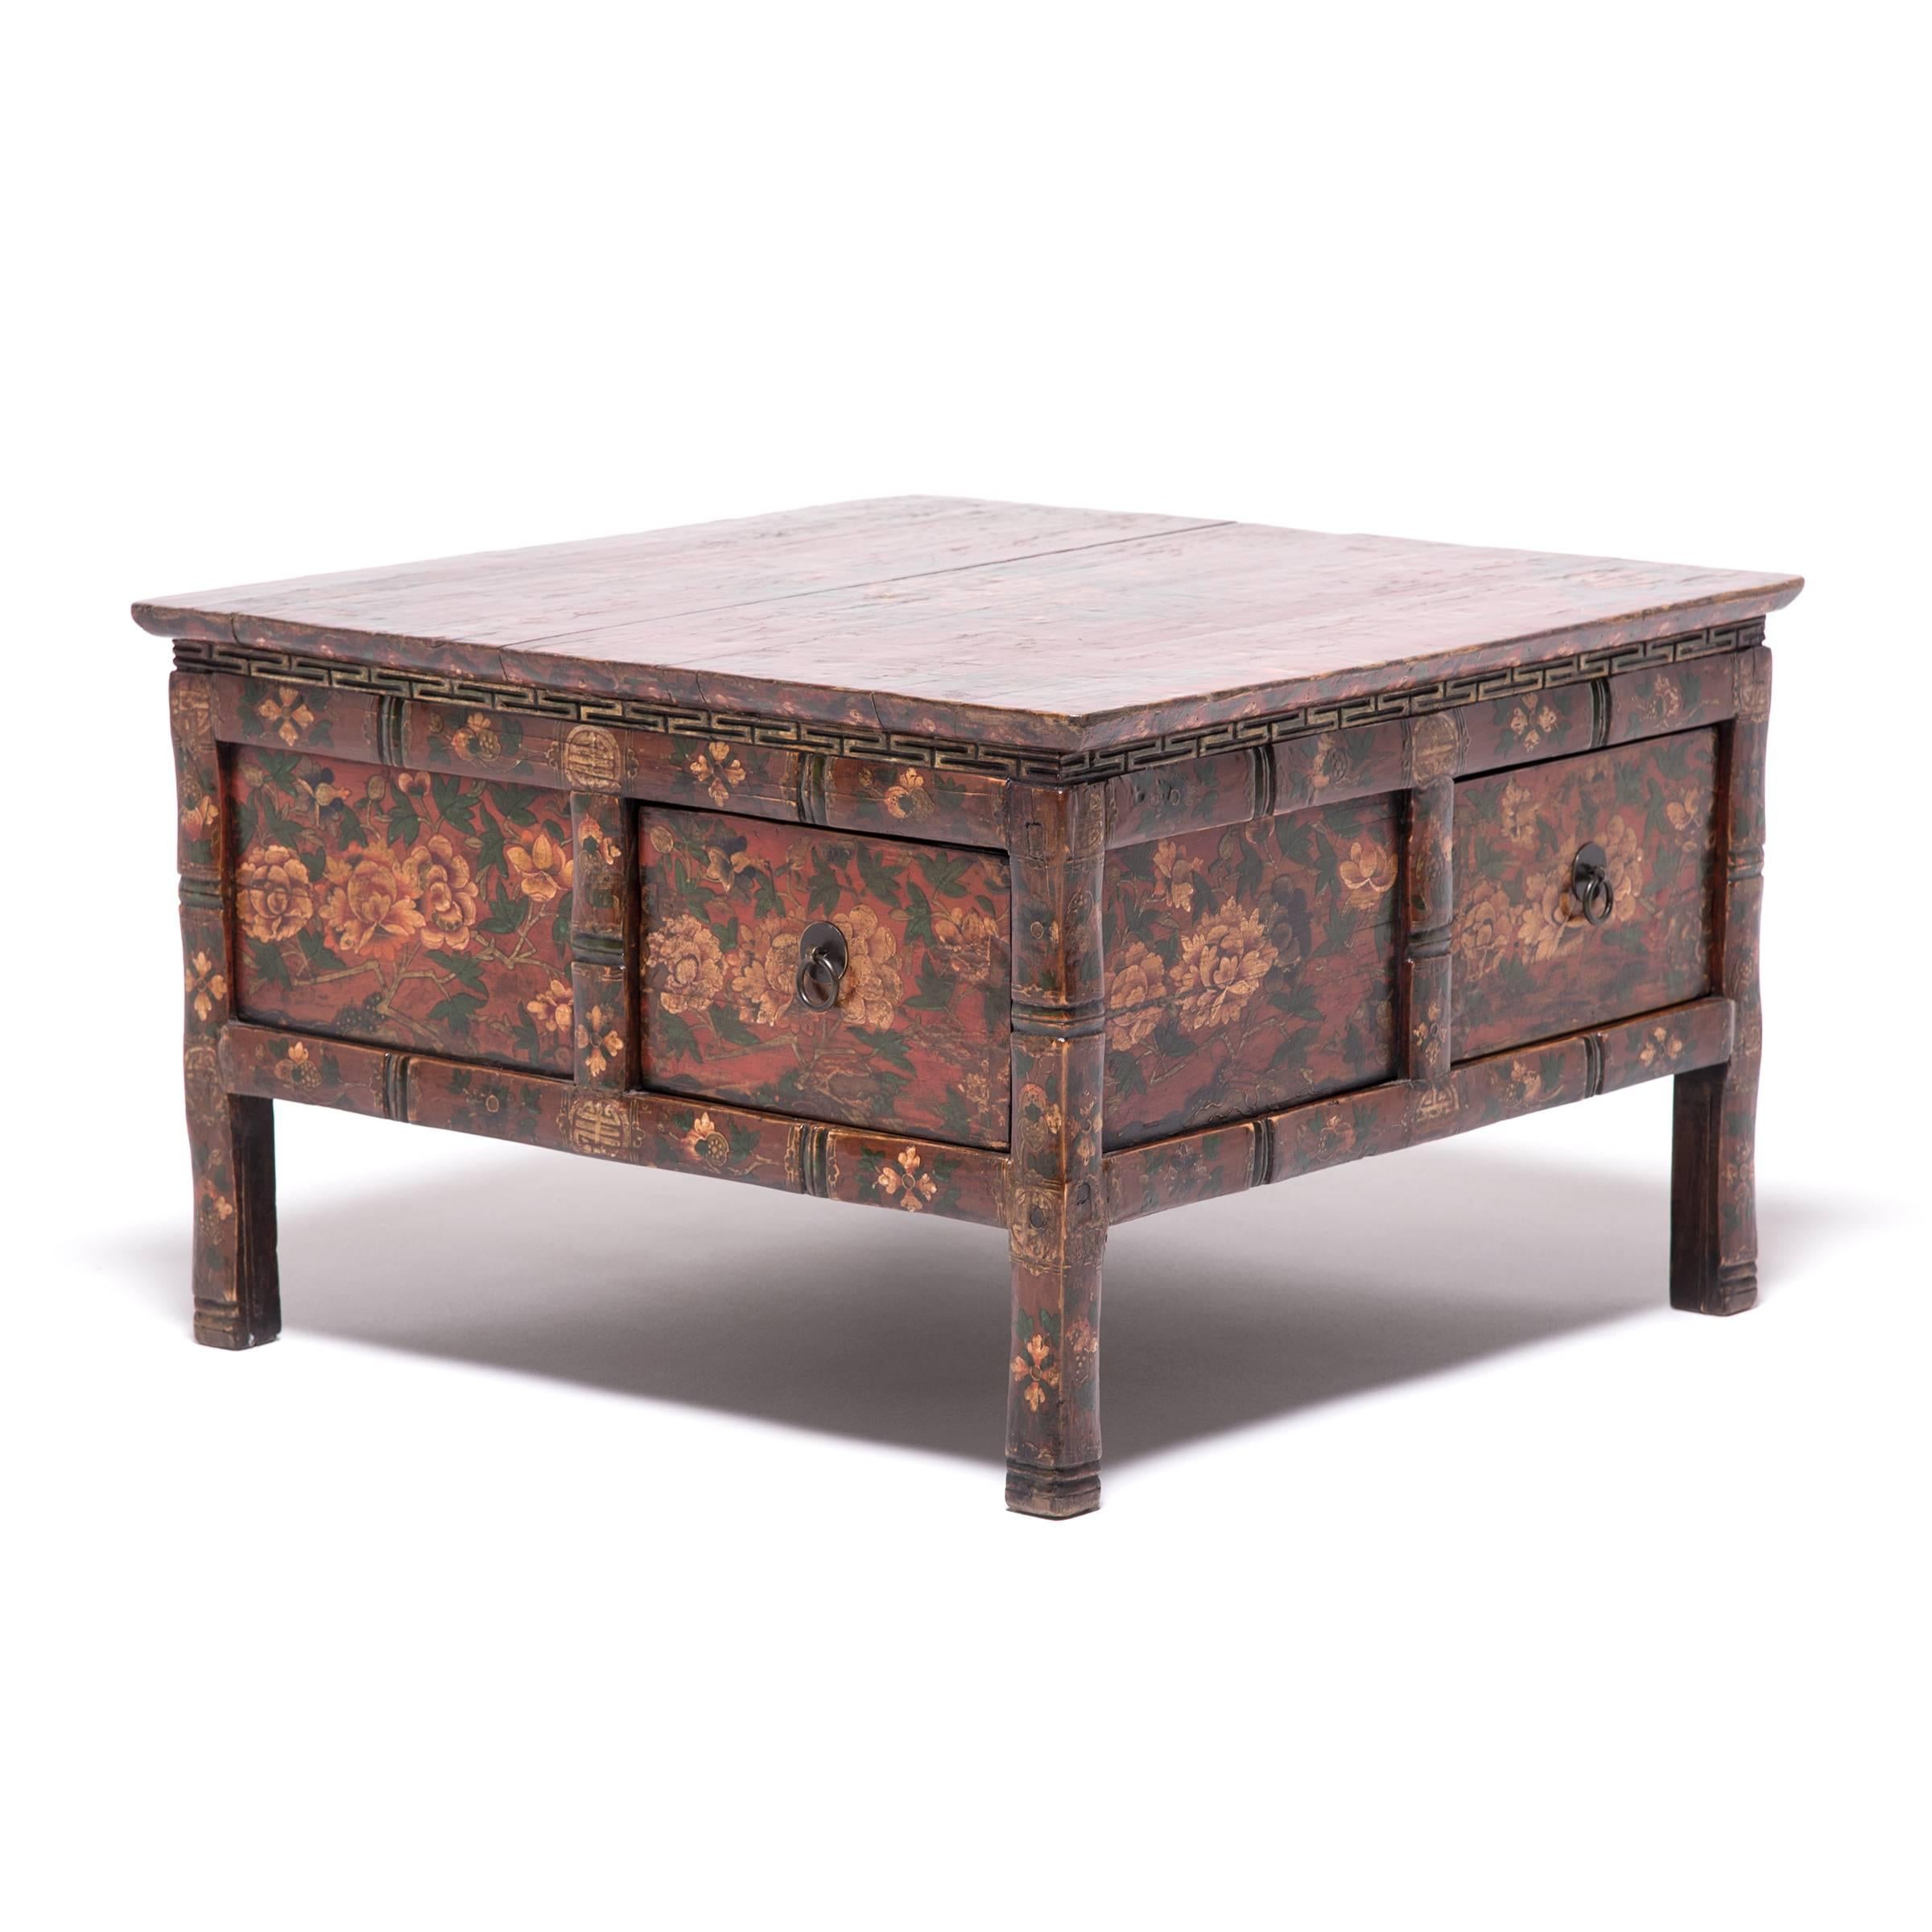 This extraordinary low Tibetan table dates to the mid-19th century and is lavishly decorated from end to end with tree peonies and offering fruits. The square table has a waisted design with corner legs and eight side panels, four of which have been